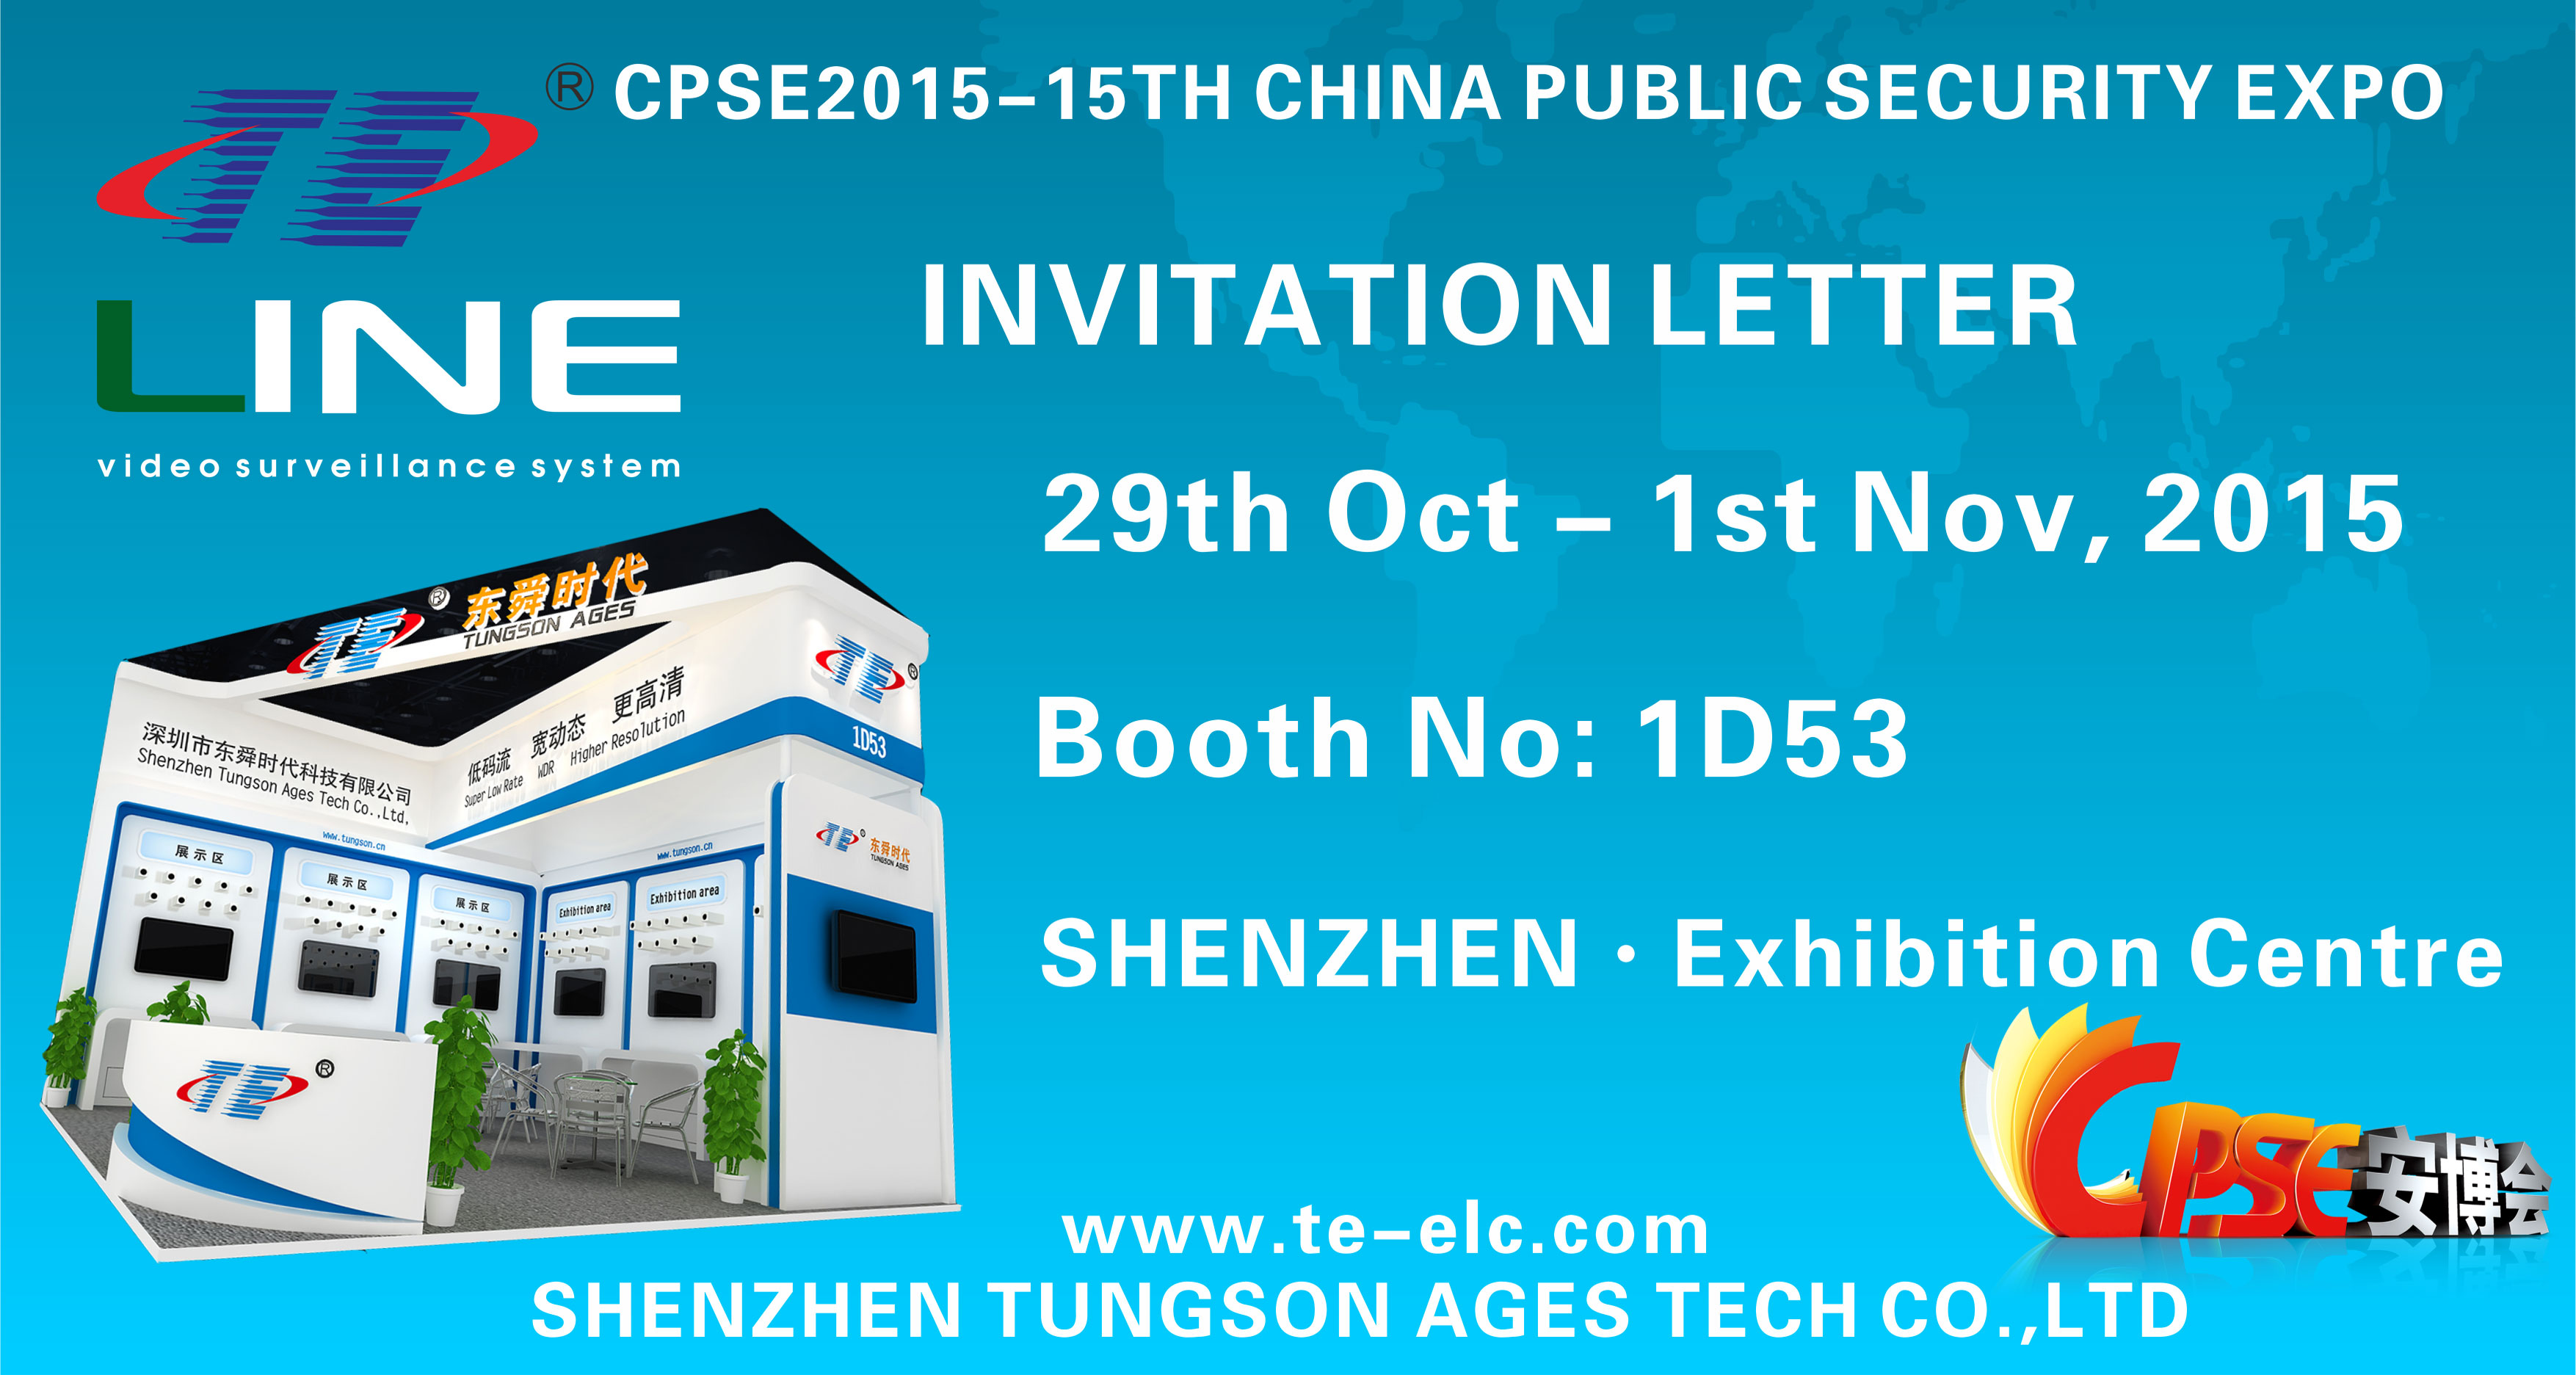 The 15th China Public Security Expo